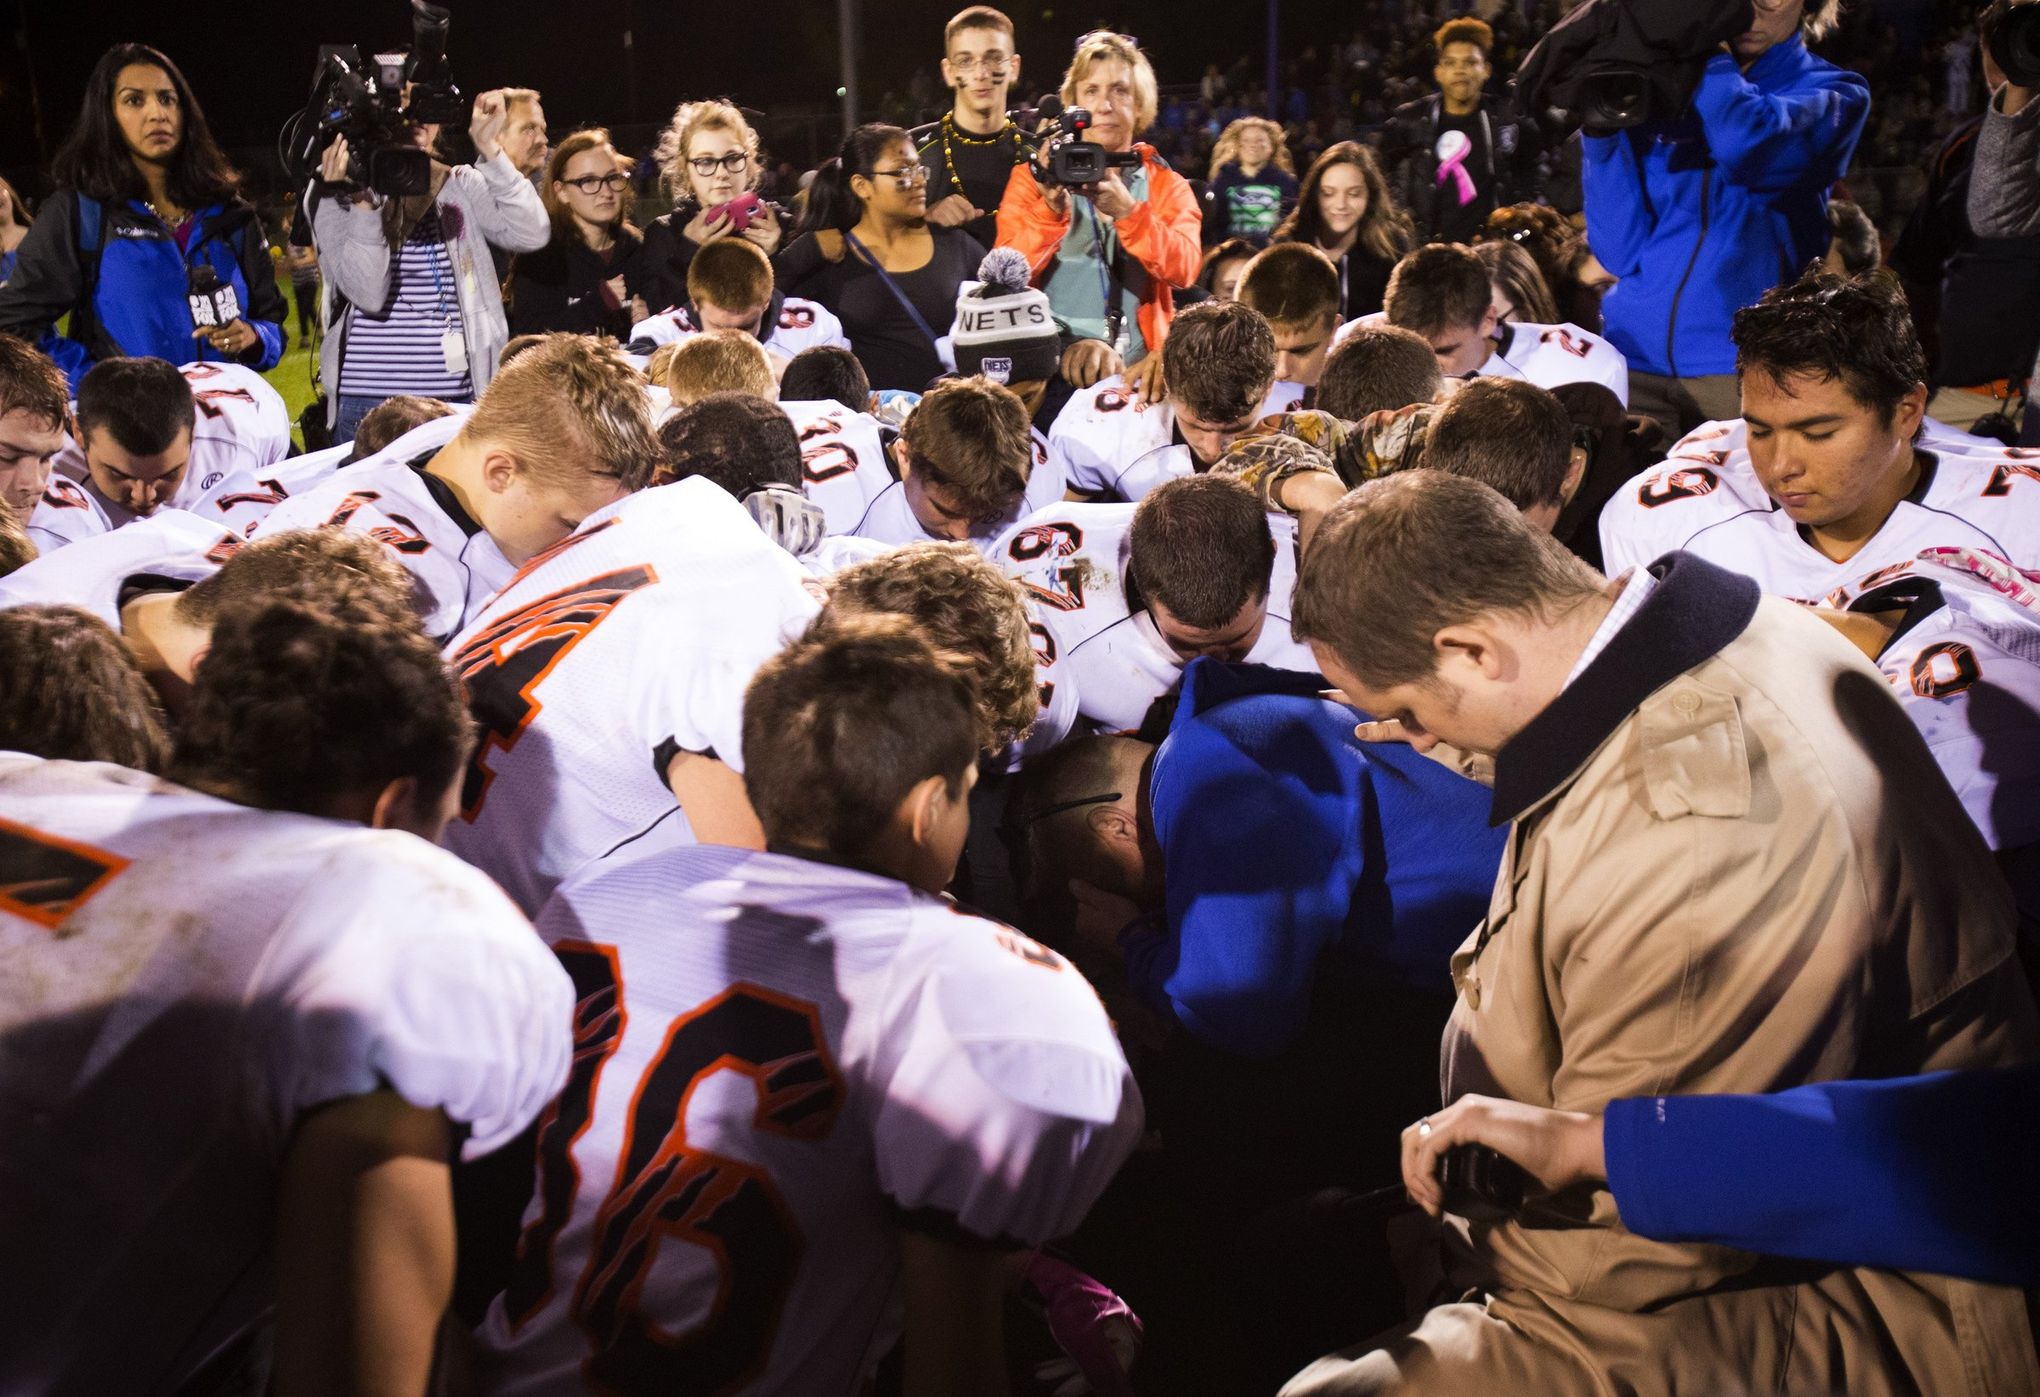 Kennedy kneeling in prayer surrounded by high school football players